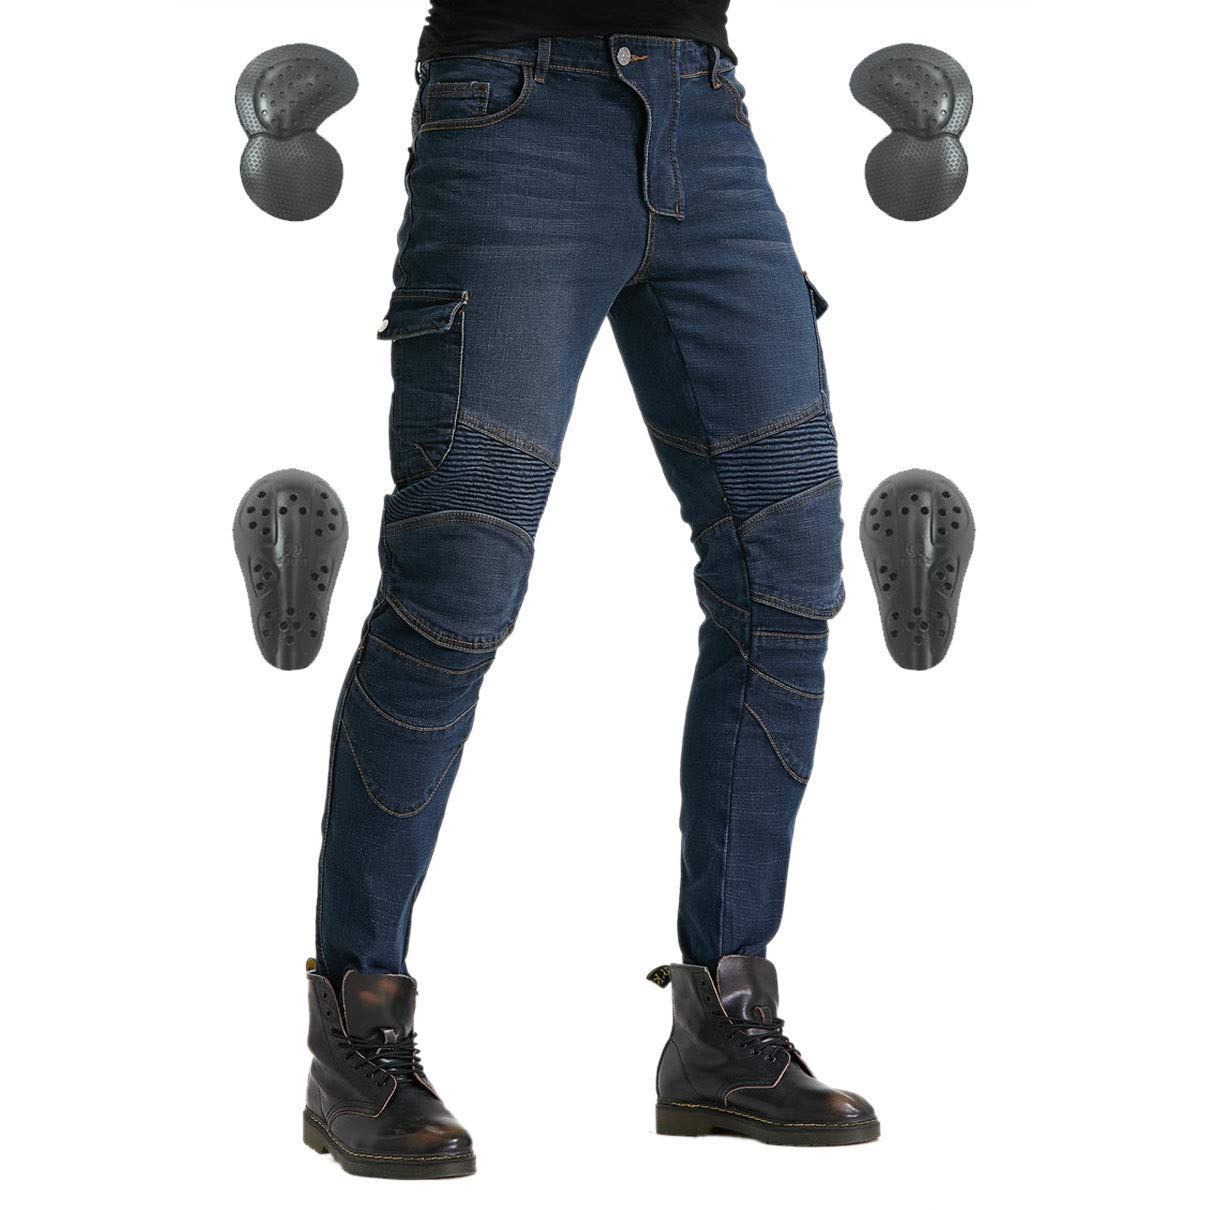 Motorcycle Jeans | Riding Jeans Made for Motorcyclists - Cycle Gear